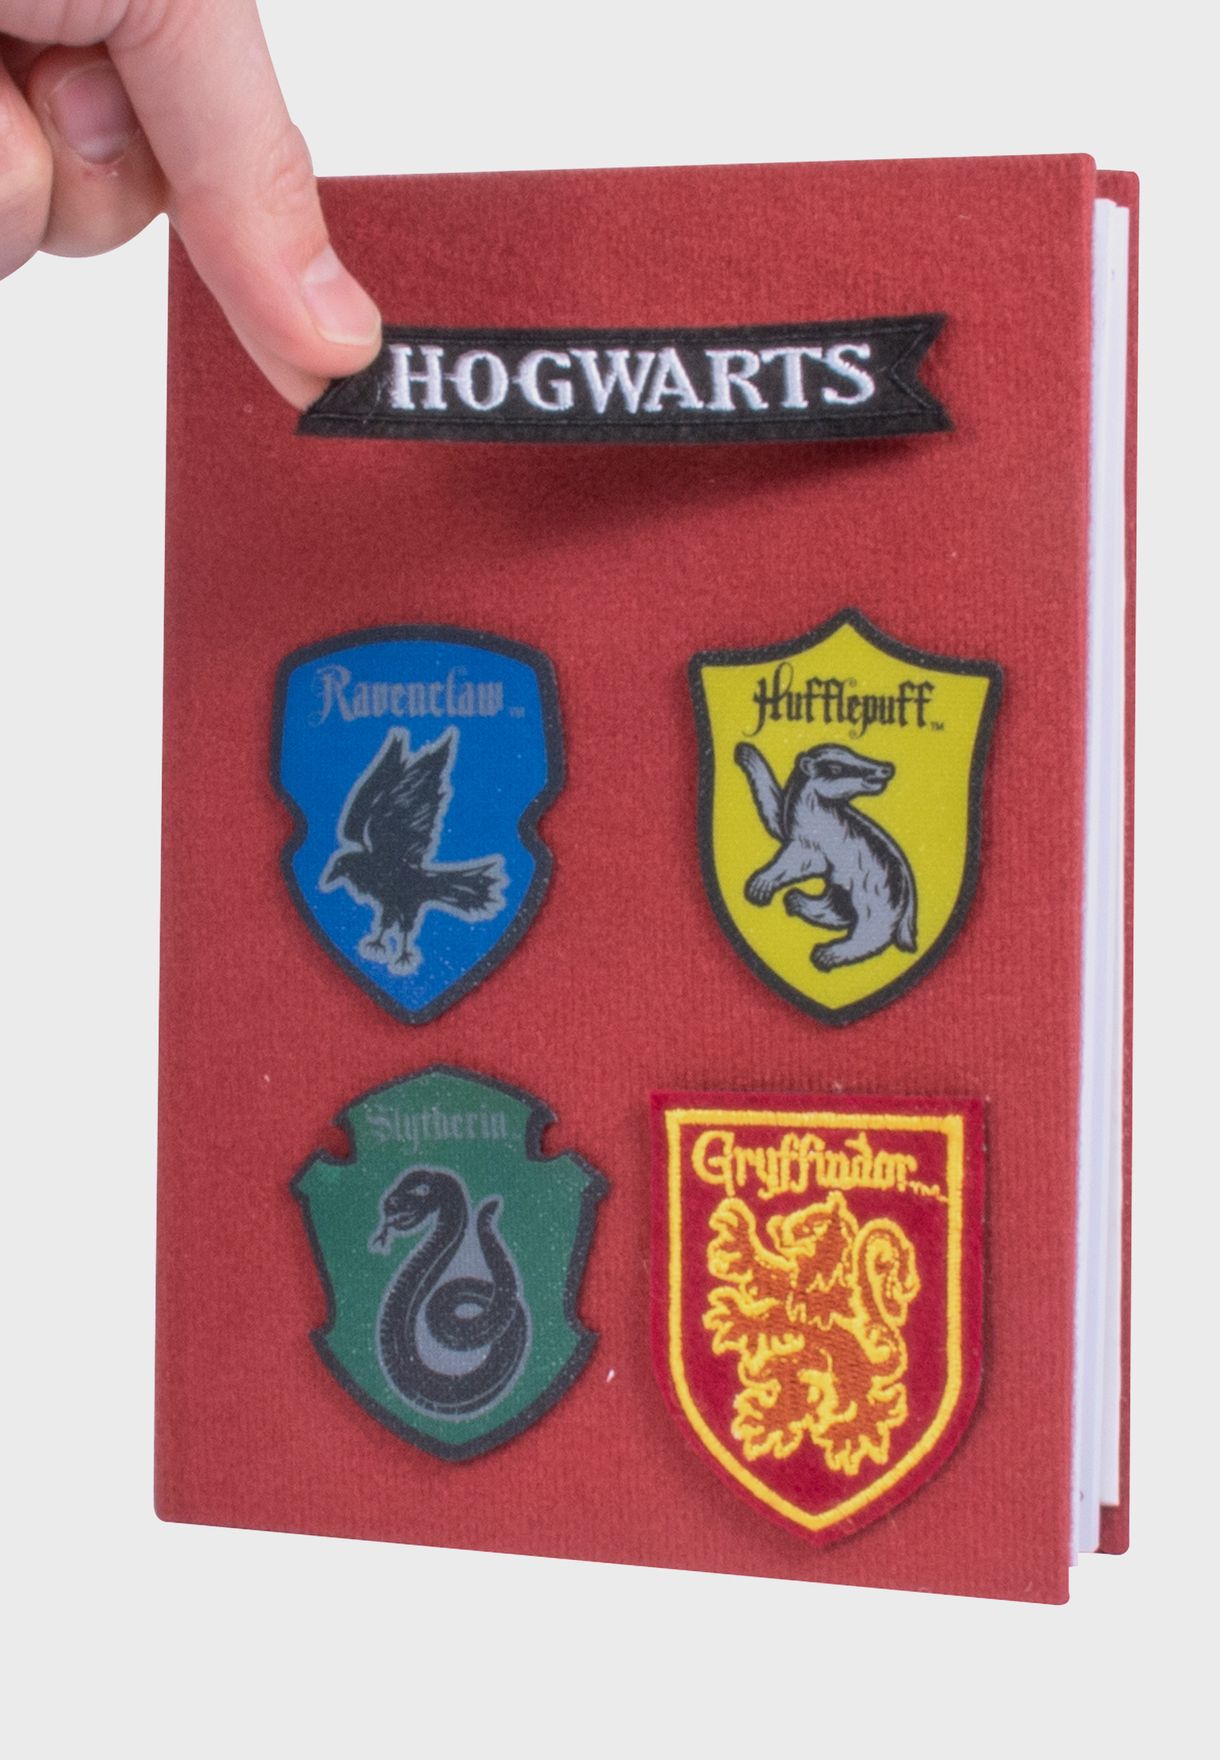 Harry Potter Velcro Notebook With Patches